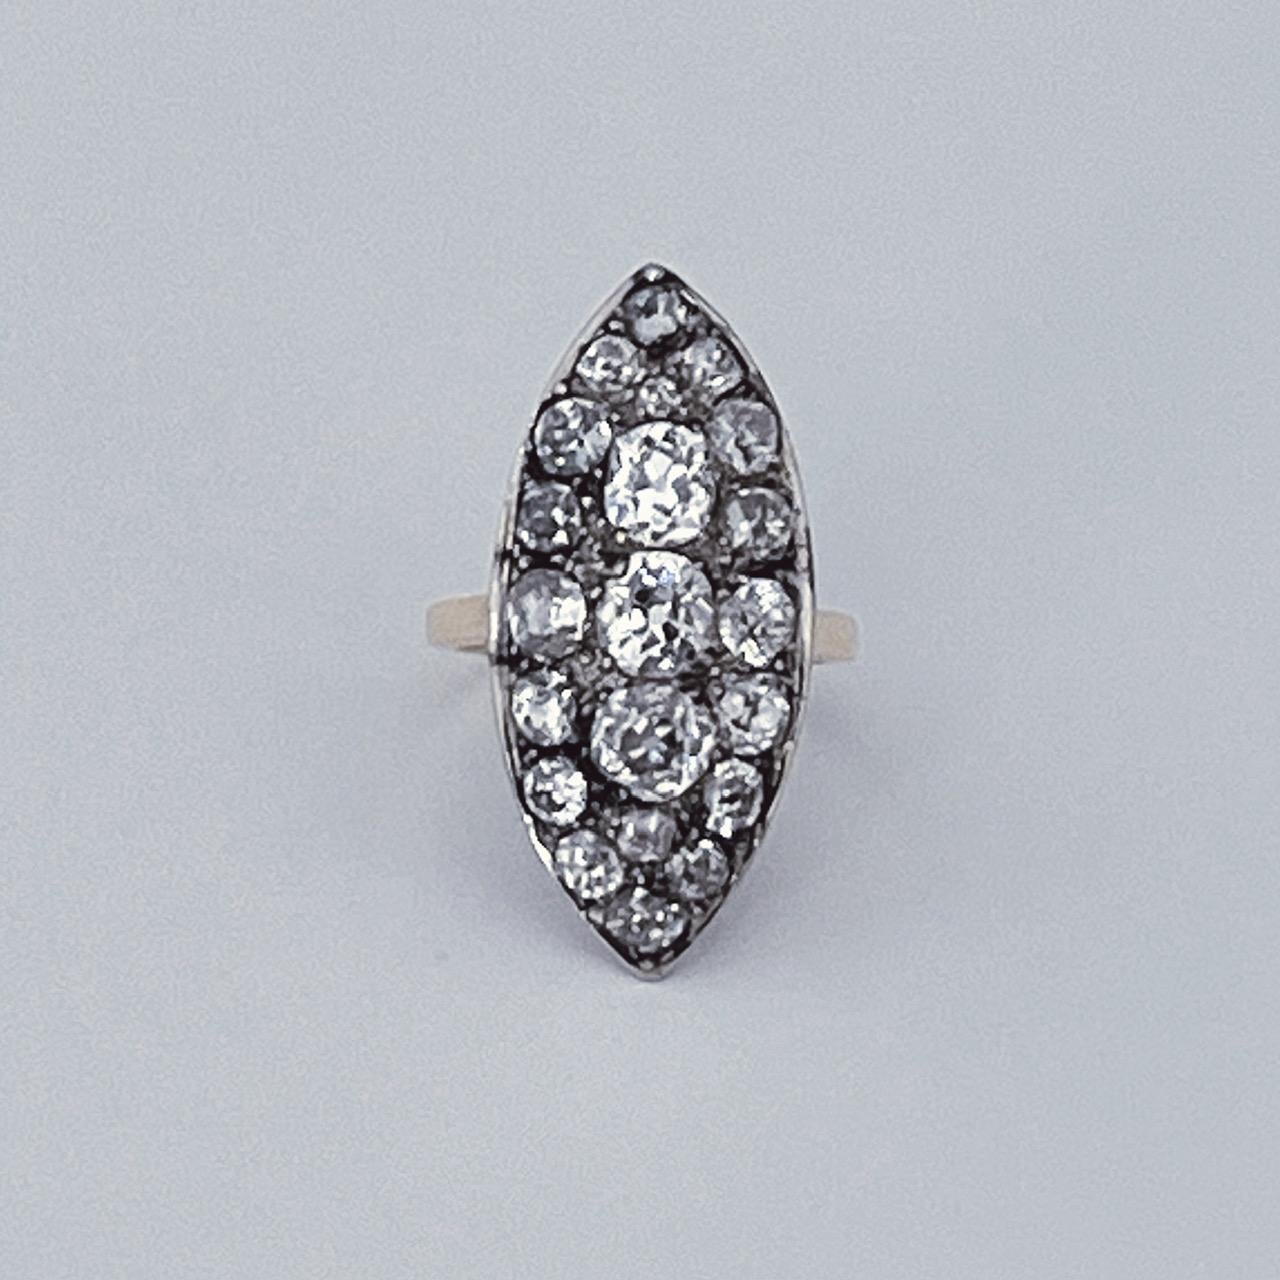 Antique Old-Cut diamond Navette-Shaped Ring Set Throughout With 7cts Diamonds For Sale 9